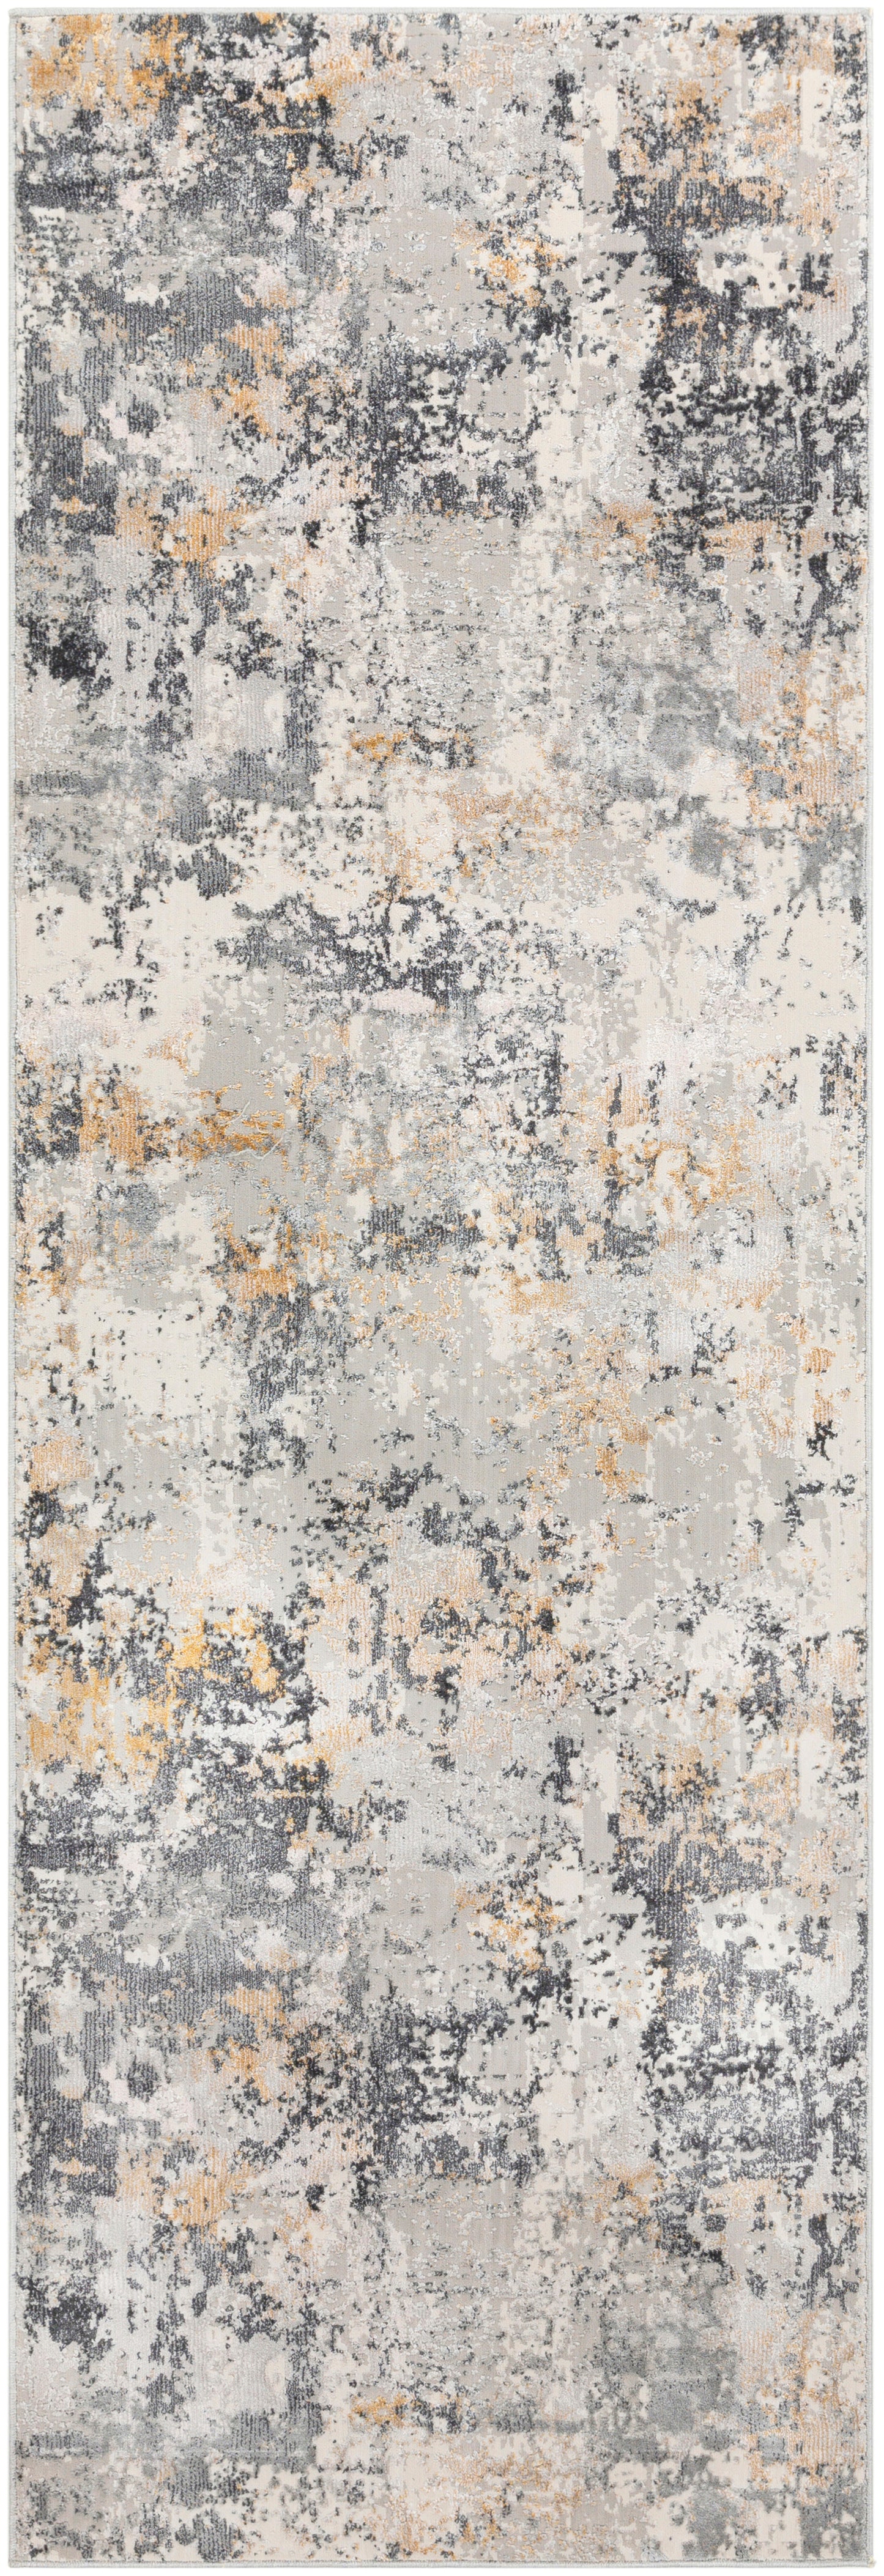 Aisha 23031 Machine Woven Synthetic Blend Indoor Area Rug by Surya Rugs